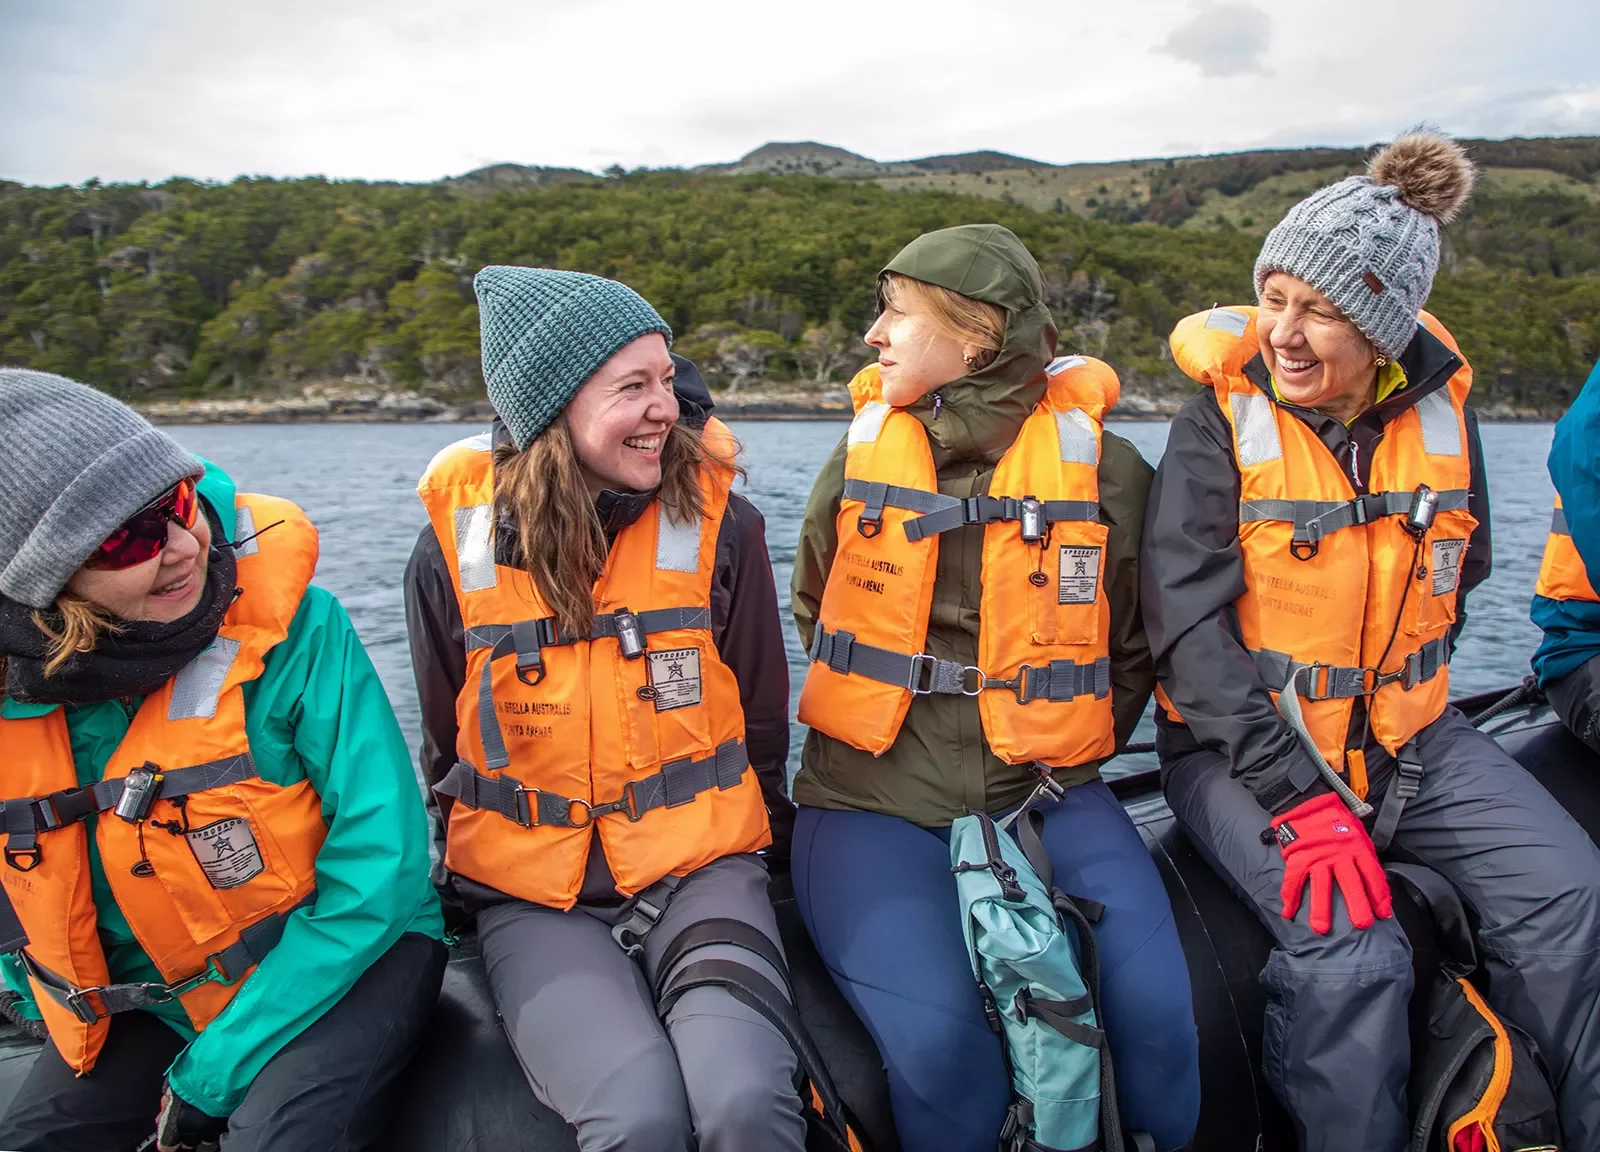 Four guests on raft in life-vests, all smiling.